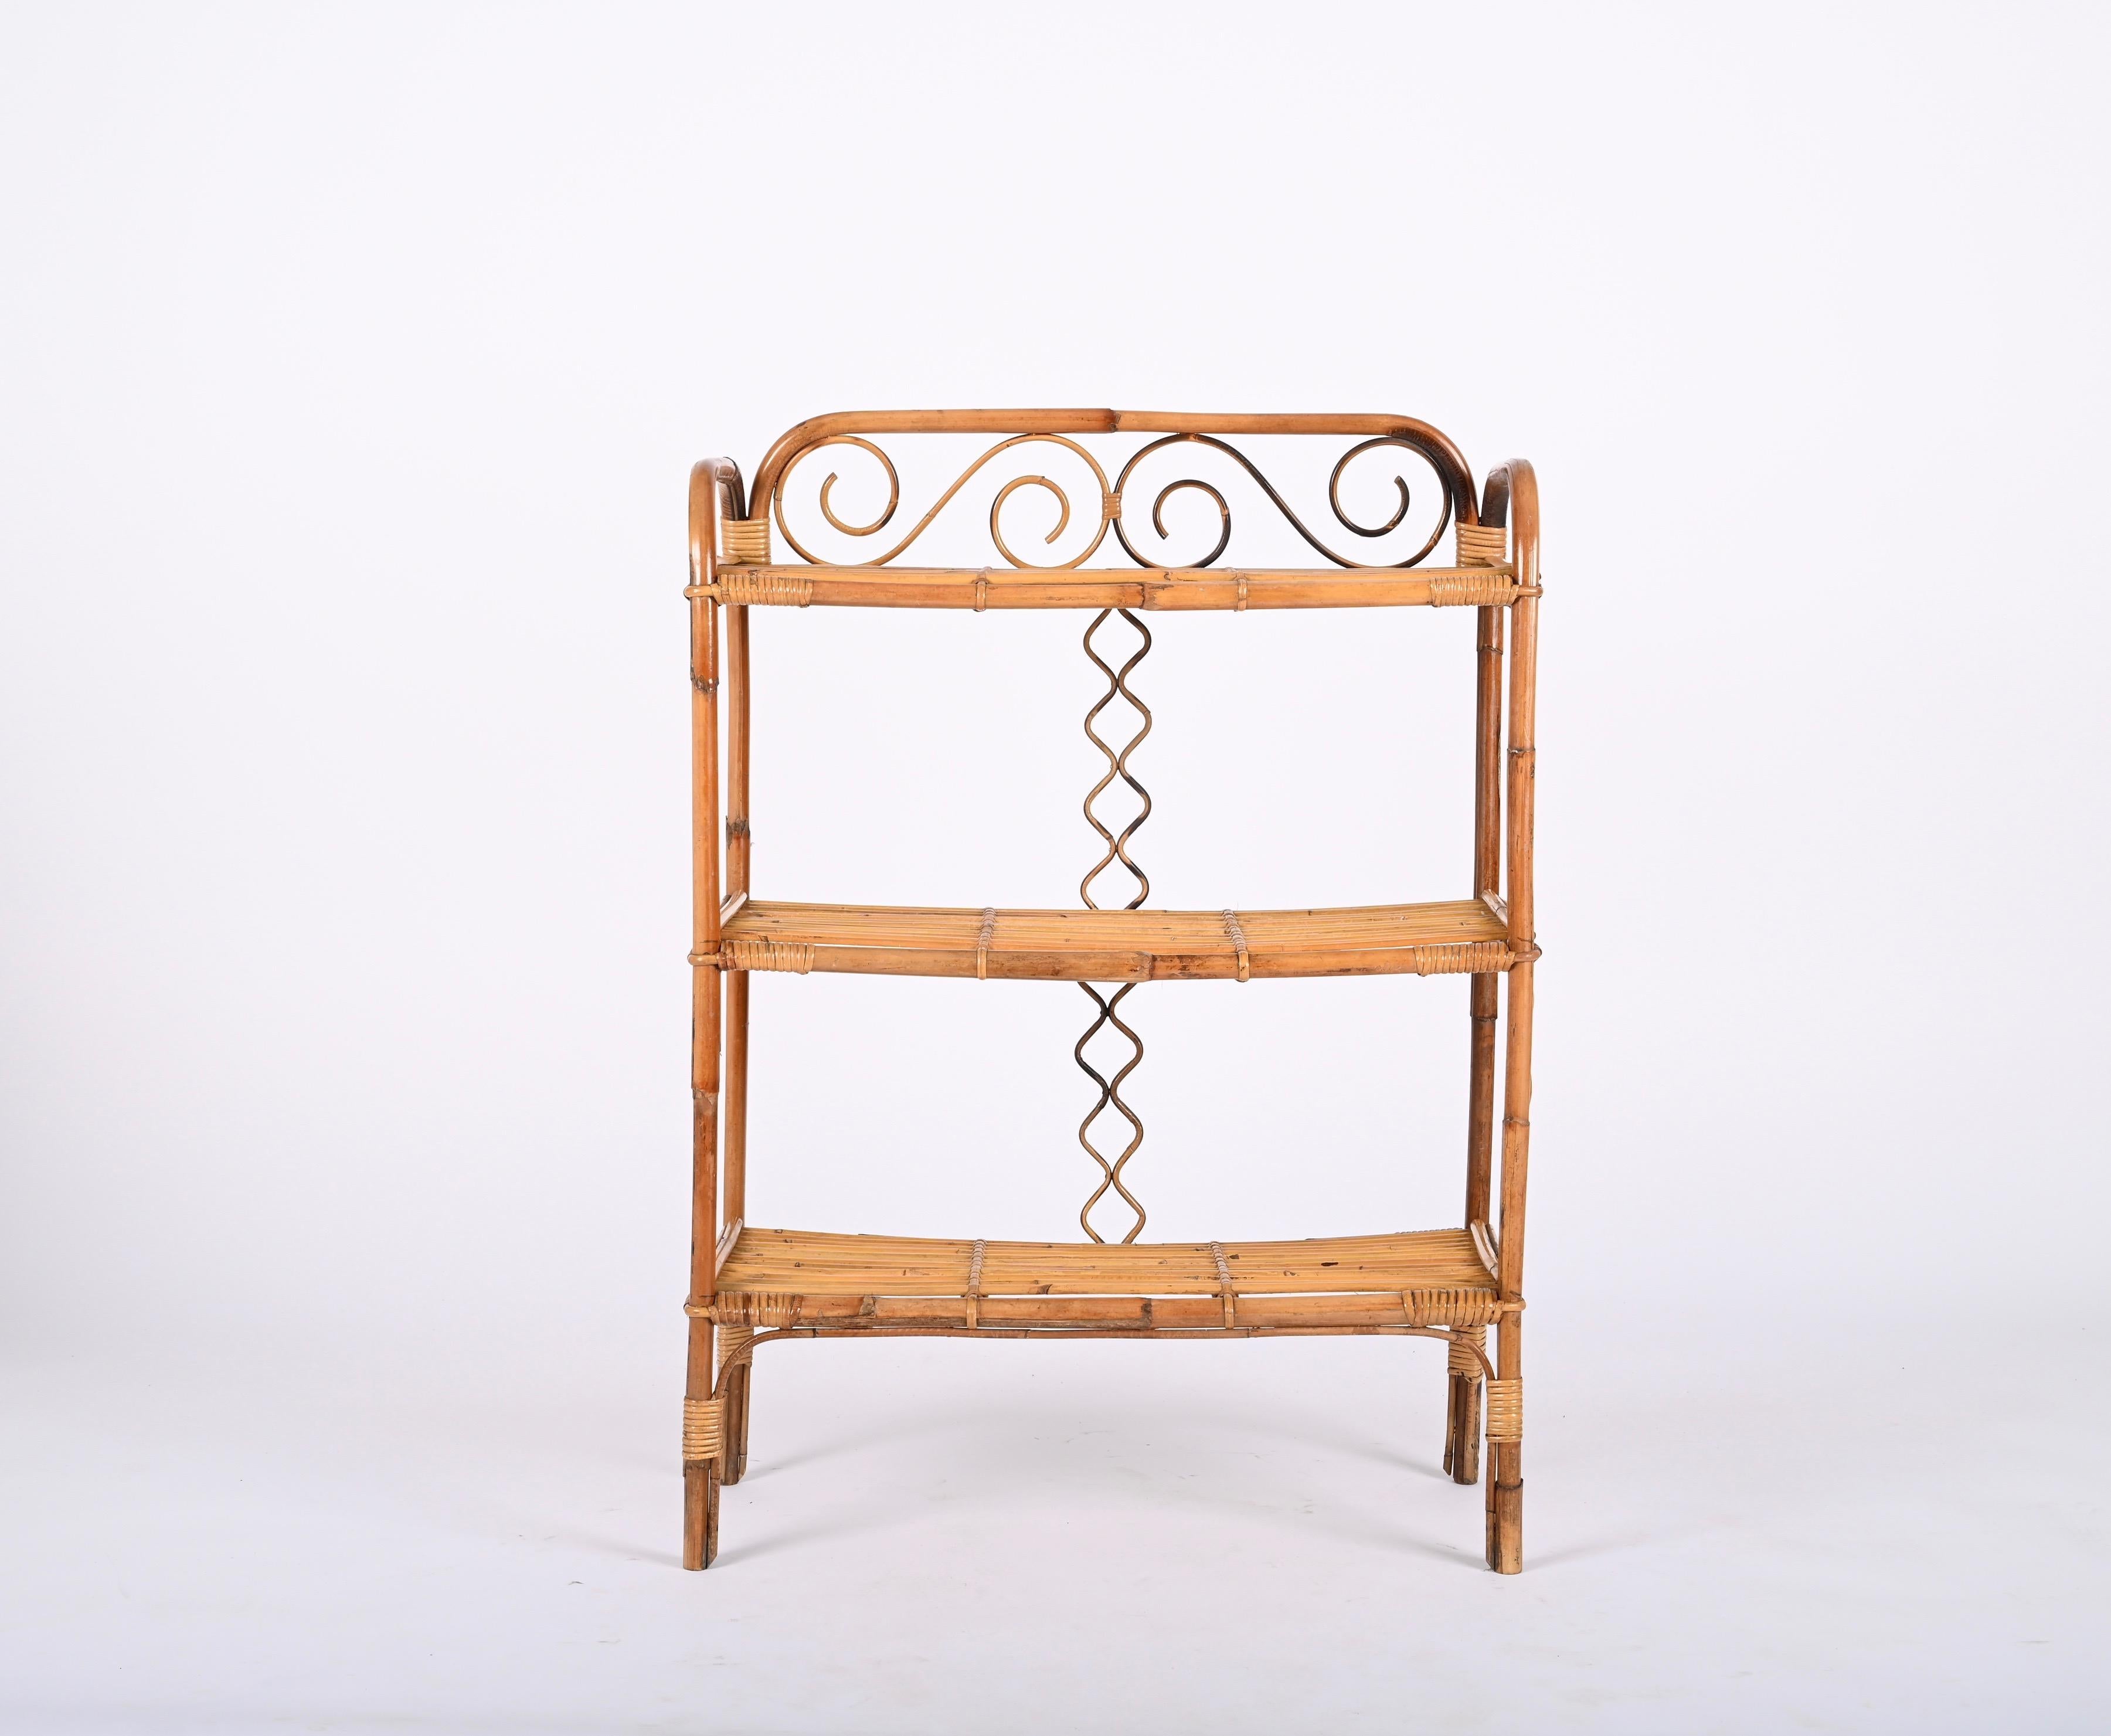 Midcentury Étagère Bamboo and Rattan, Italian Bookcase with Three Shelves, 1970s For Sale 2